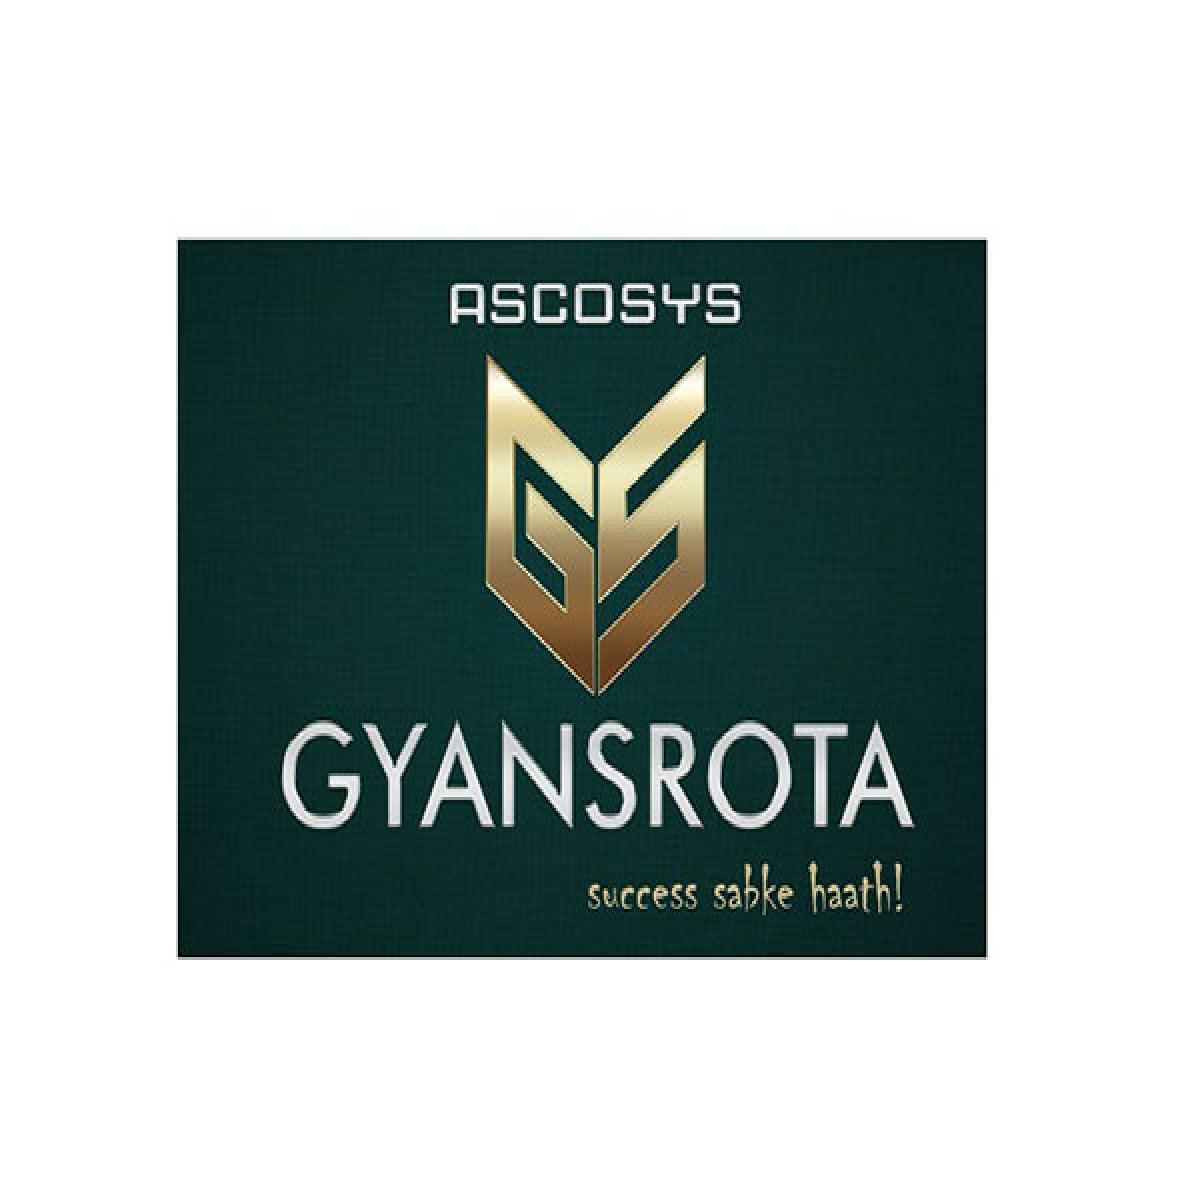 GYANSROTA Completes 1st Year Successfully